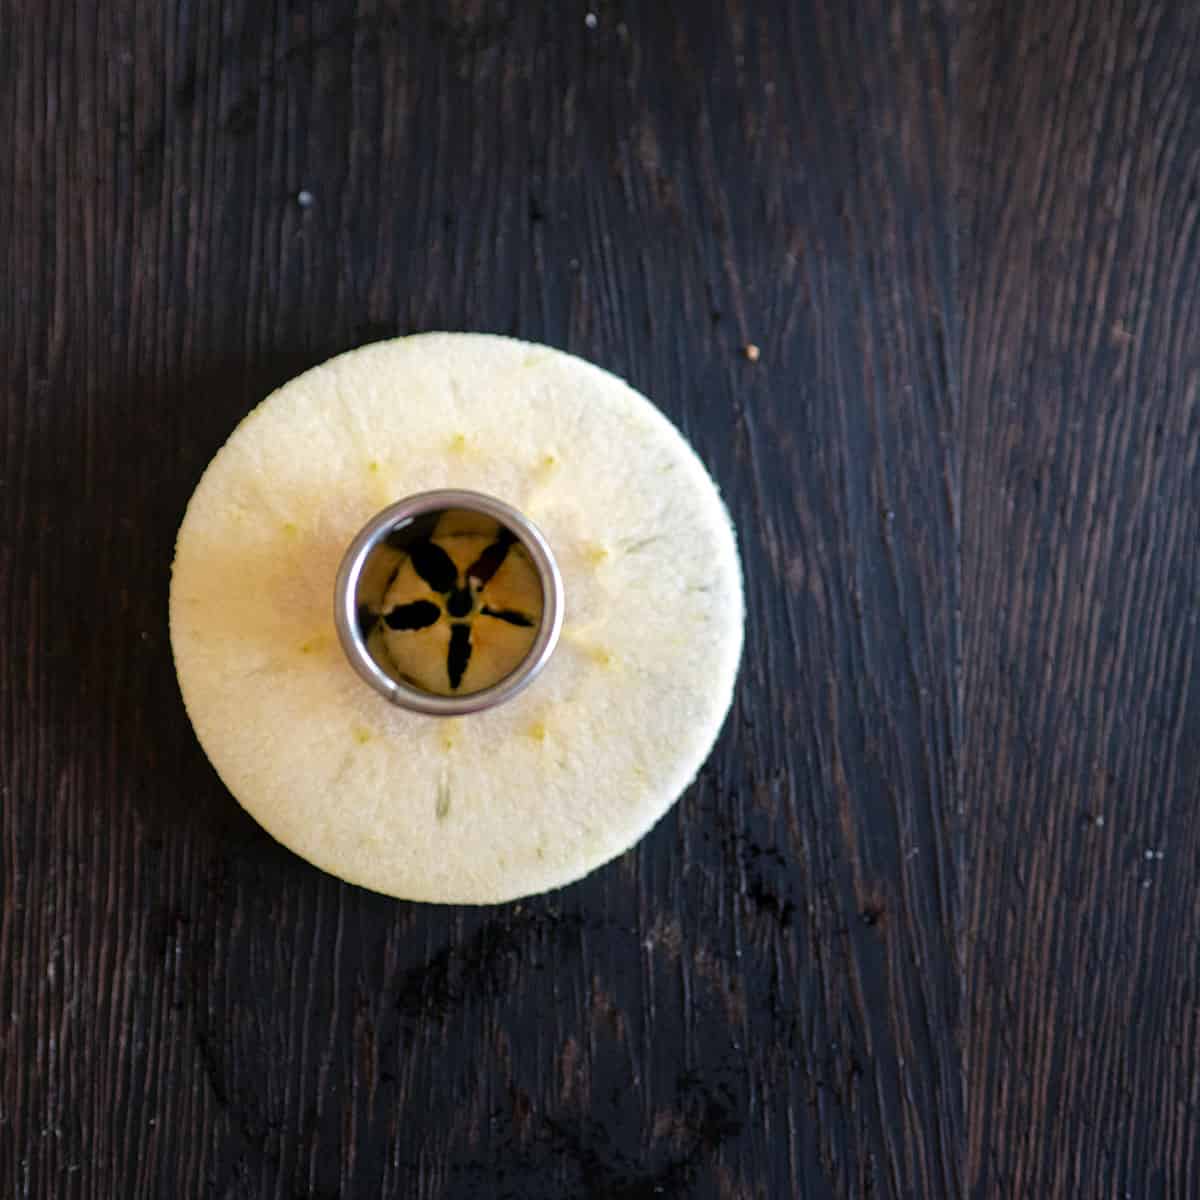 Using 1-inch circle cutter to remove core from apple slice.